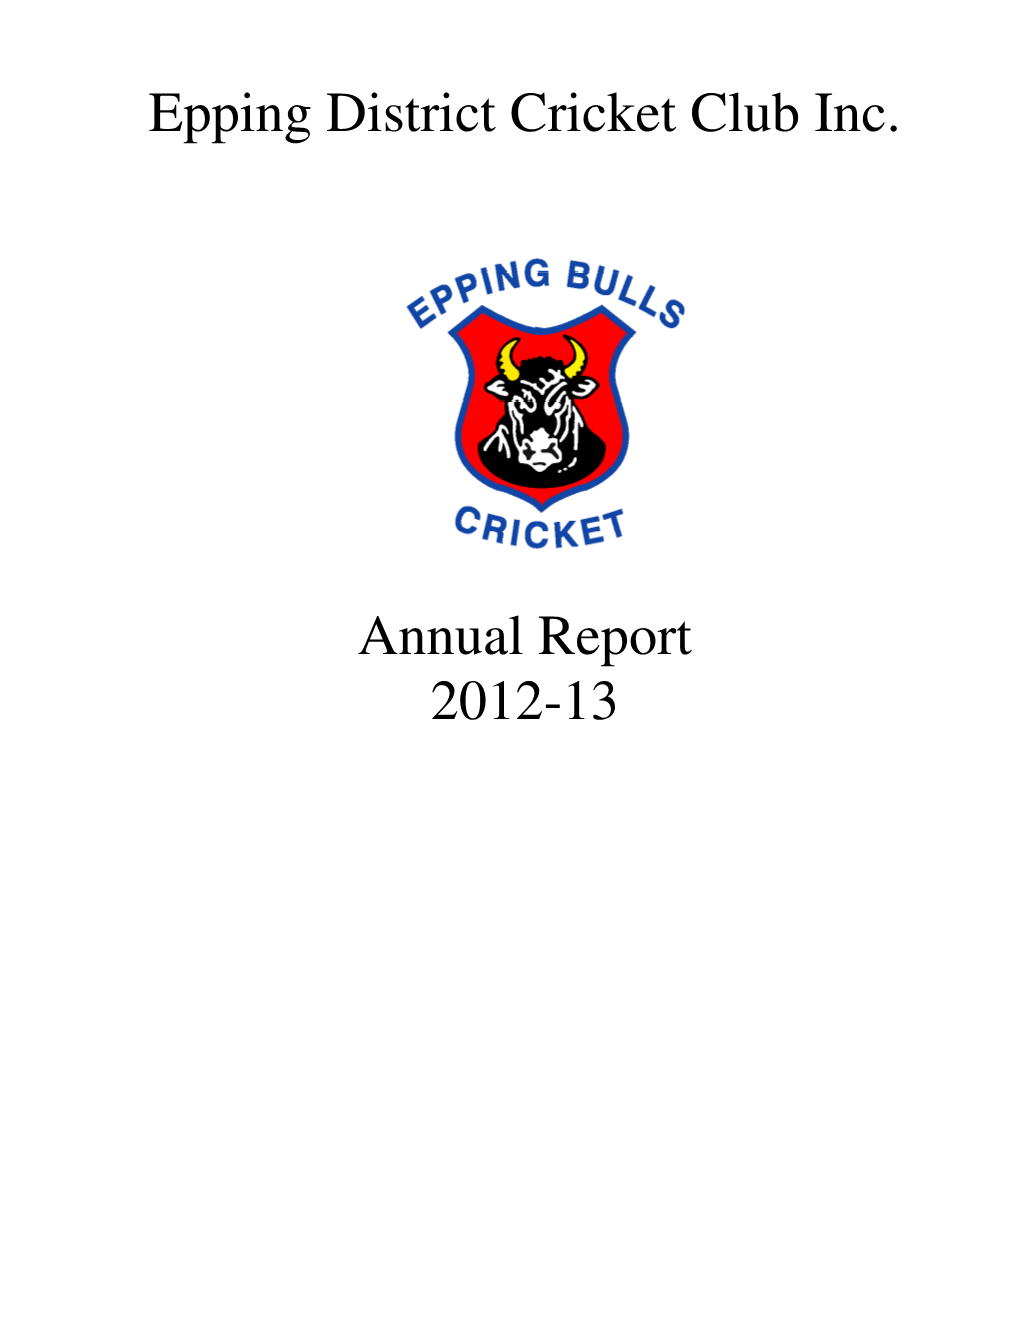 Epping District Cricket Club Inc. Annual Report 2012-13